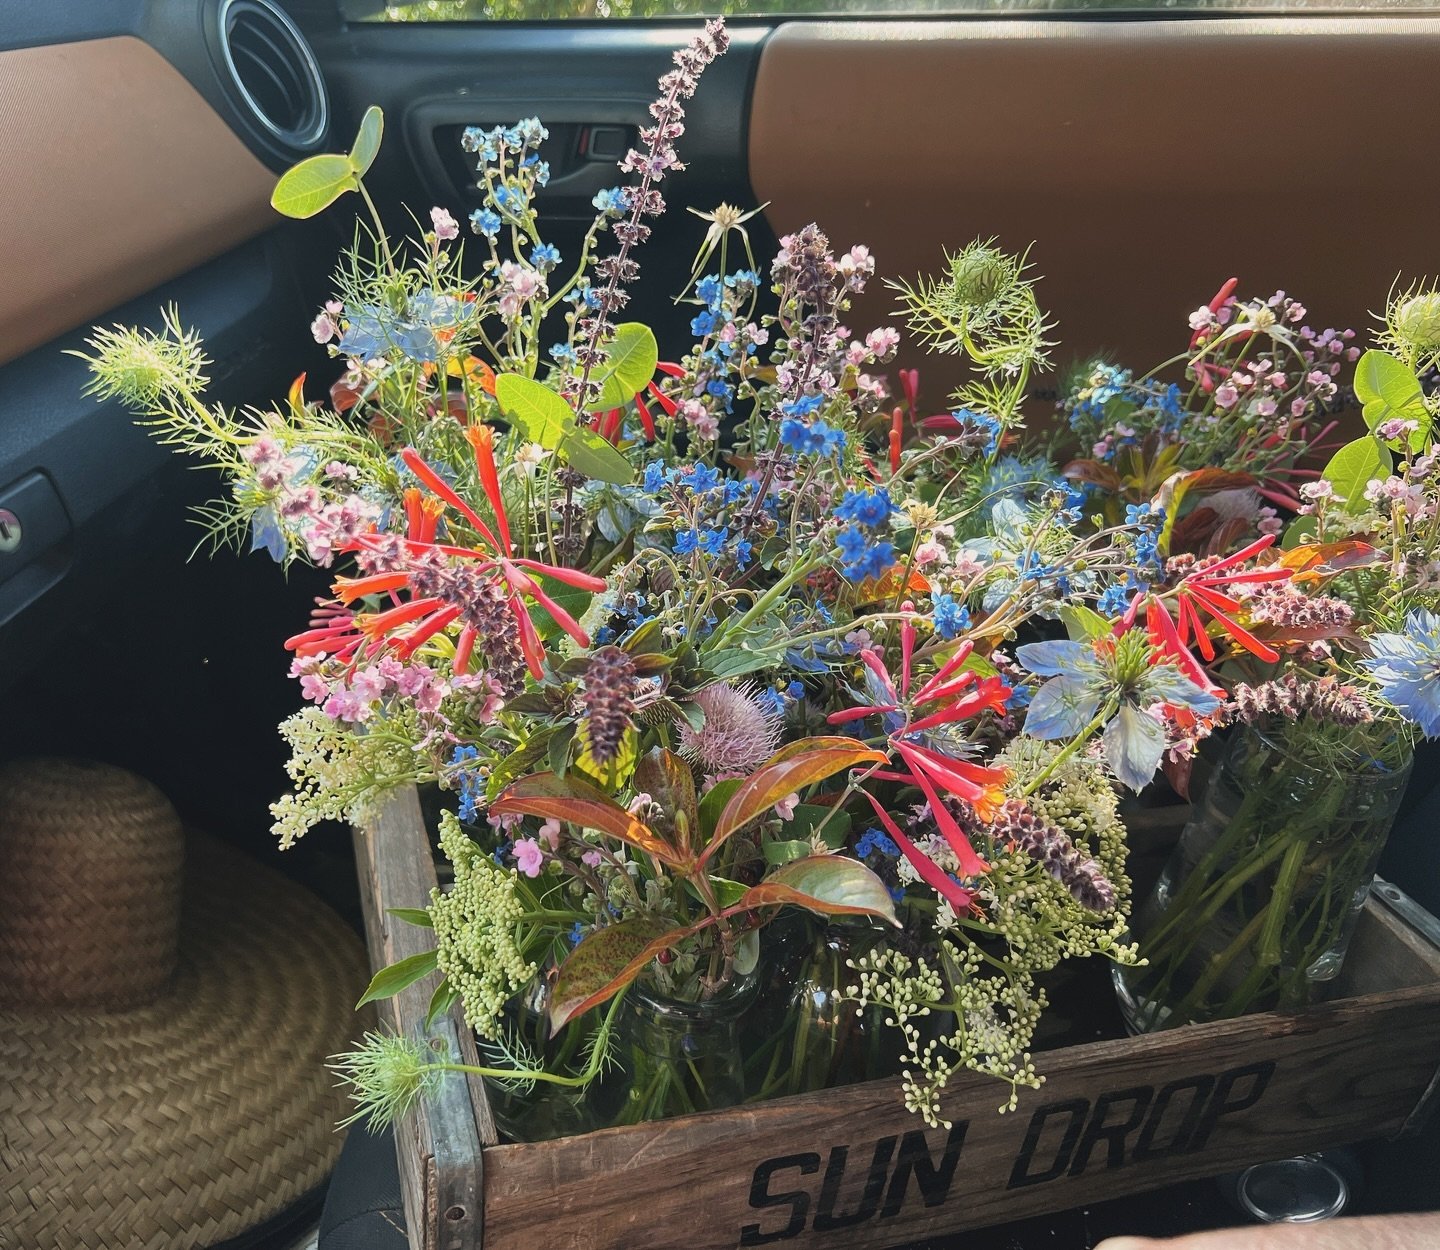 Tiny order for high tops for Ringling Museum. Coral honeysuckle is one of my all time fav native plants in an arrangement.